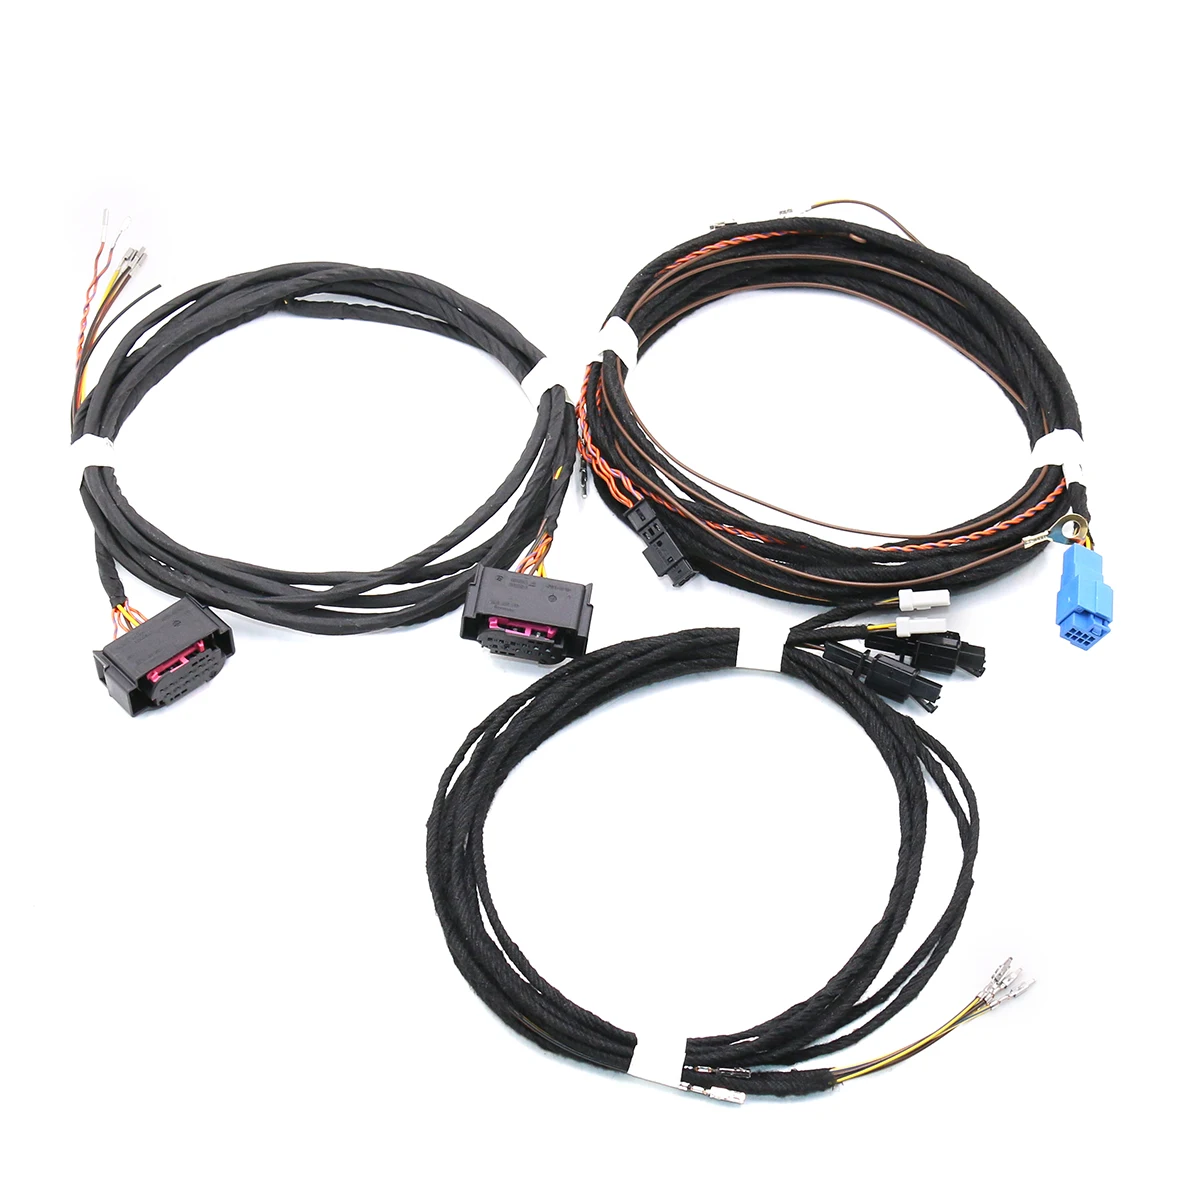 FOR VW Touareg 7P Side Assist Lane Change Blind spot assist Wire Cable Harness